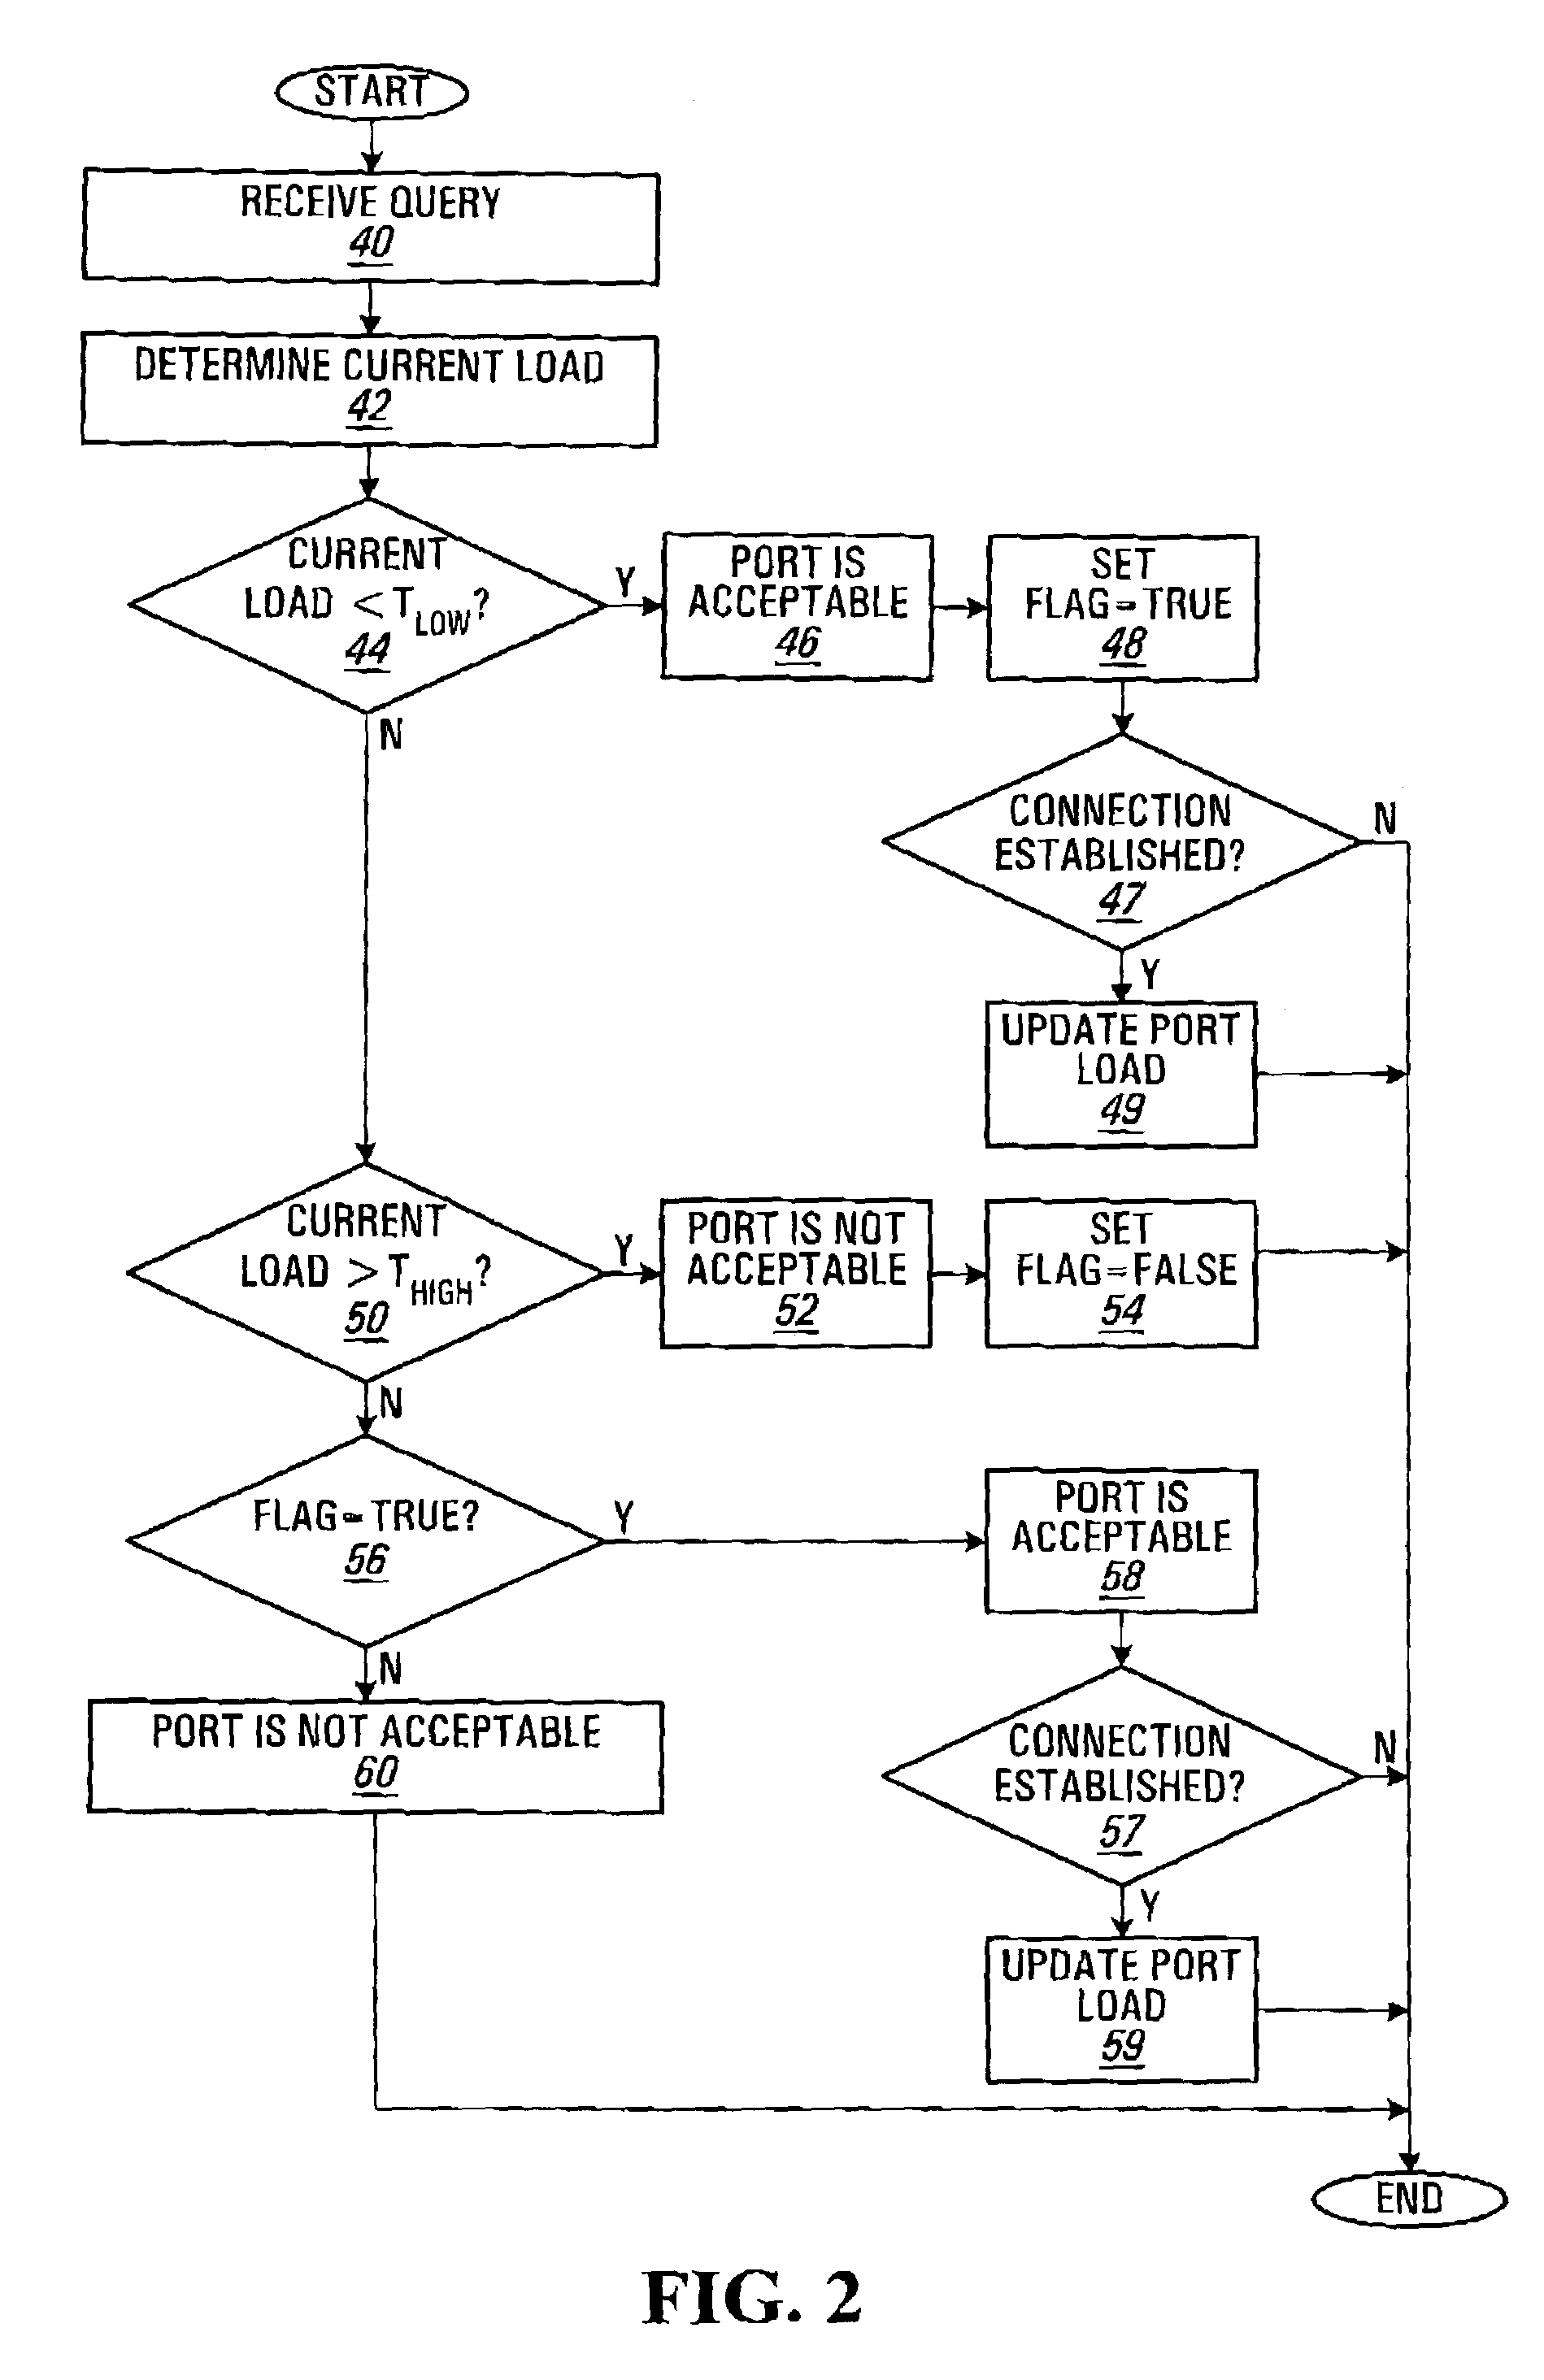 Control plane architecture for automatically switched optical network